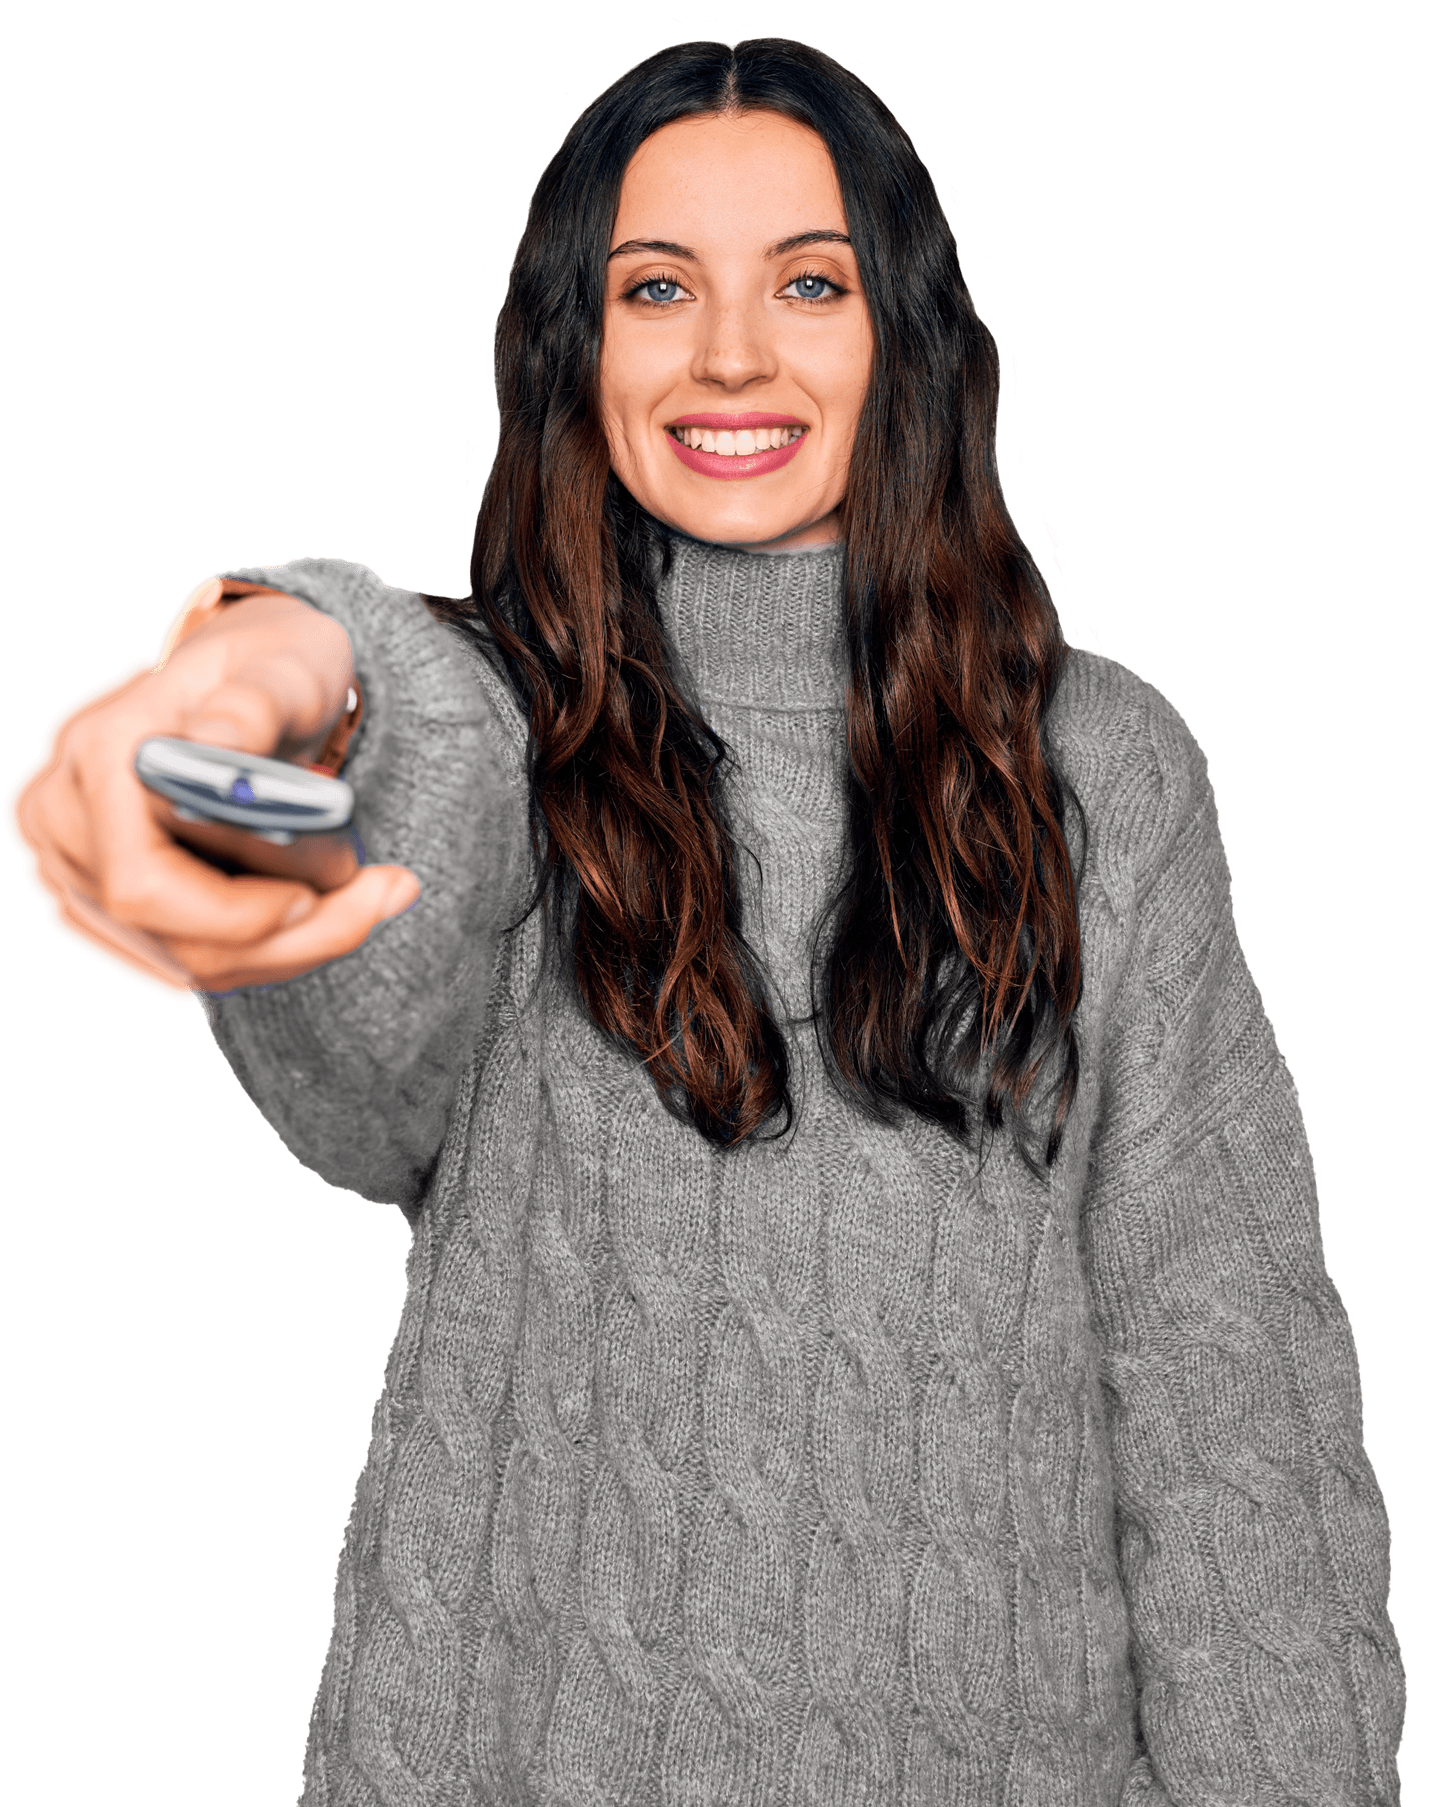 A woman in a gray sweater pointing a TV remote